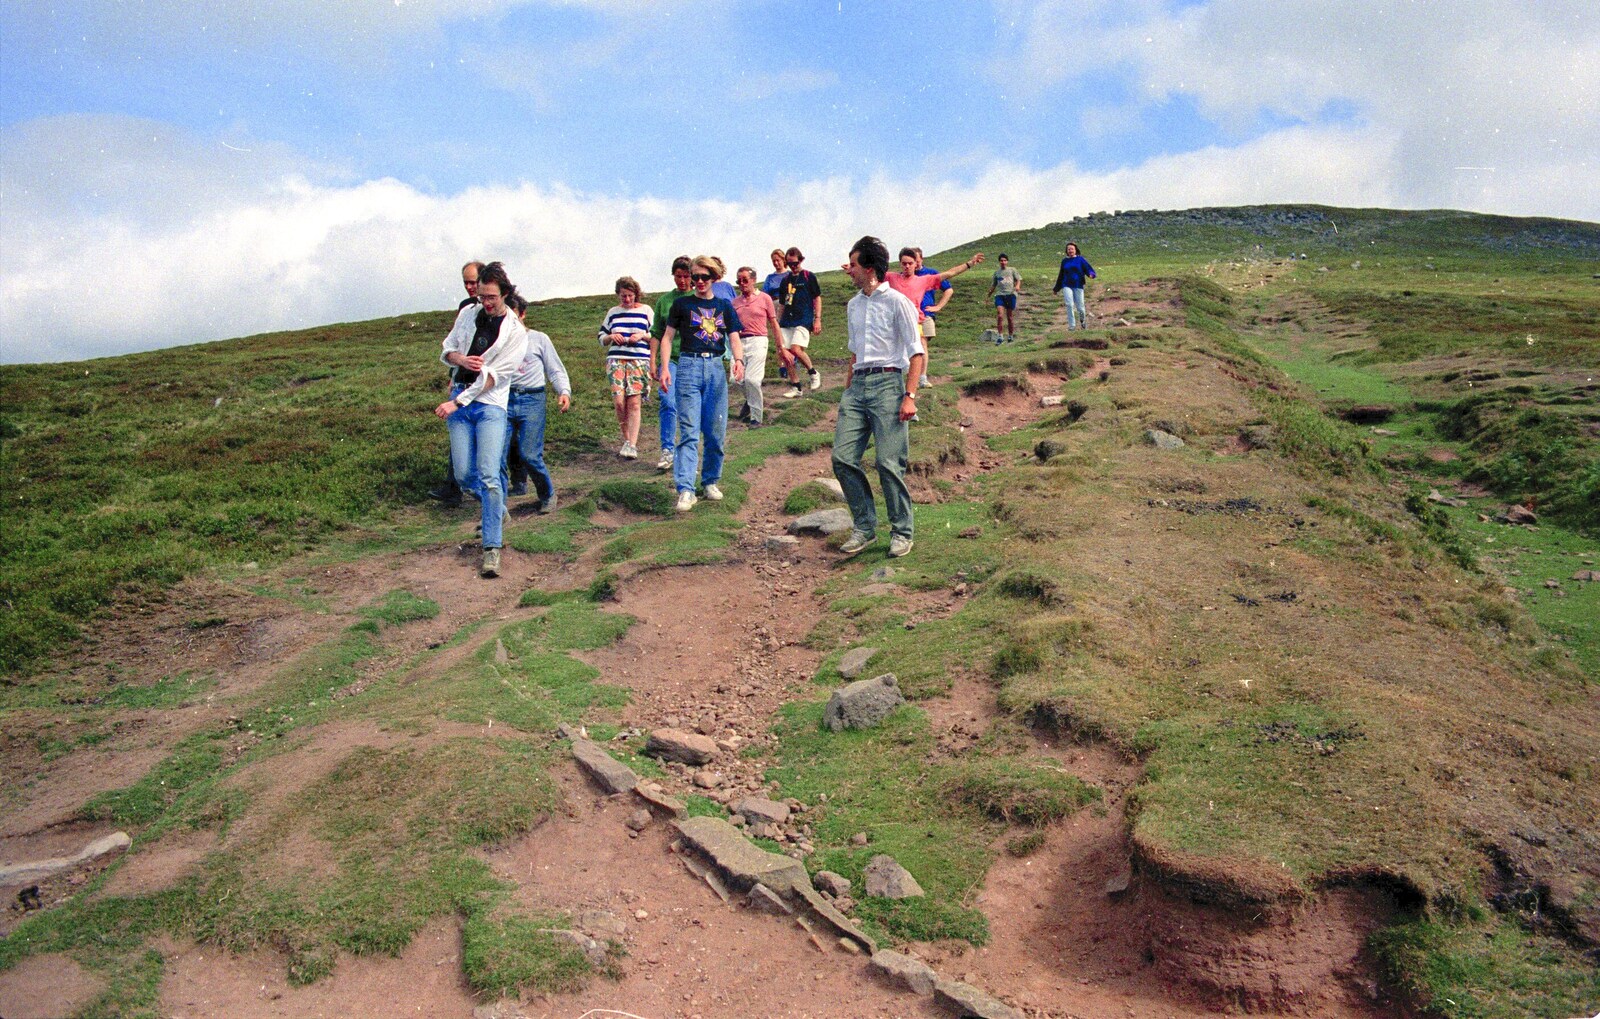 The walkers stumble down the hill from A Walk in the Brecon Beacons, Bannau Brycheiniog, Wales - 5th August 1990